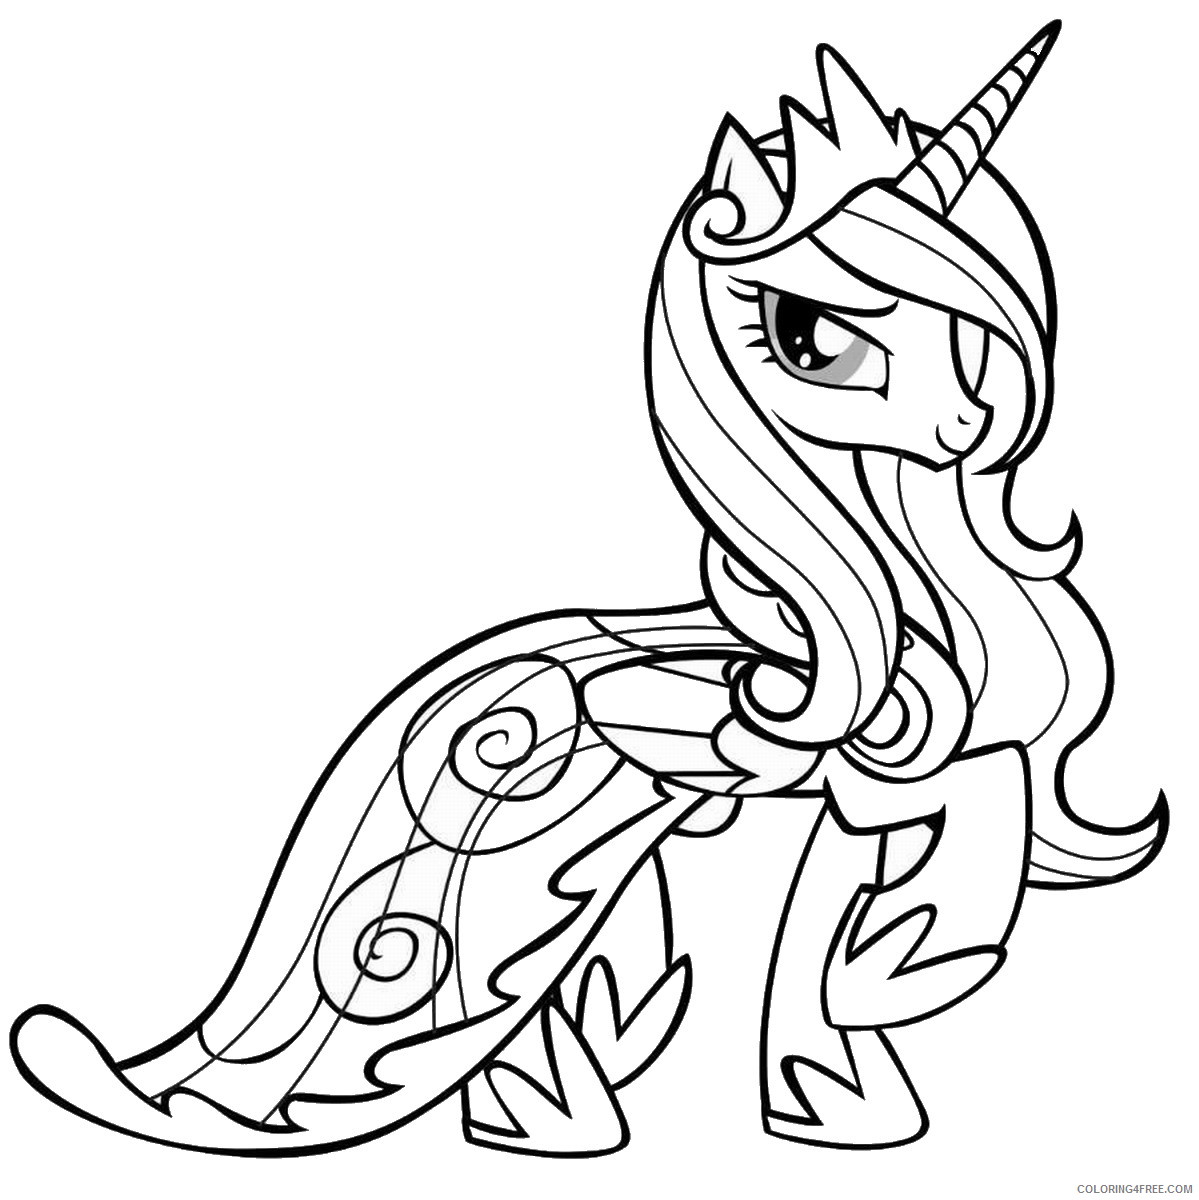 Download My Little Pony Coloring Pages Cartoons my little pony 27 ...